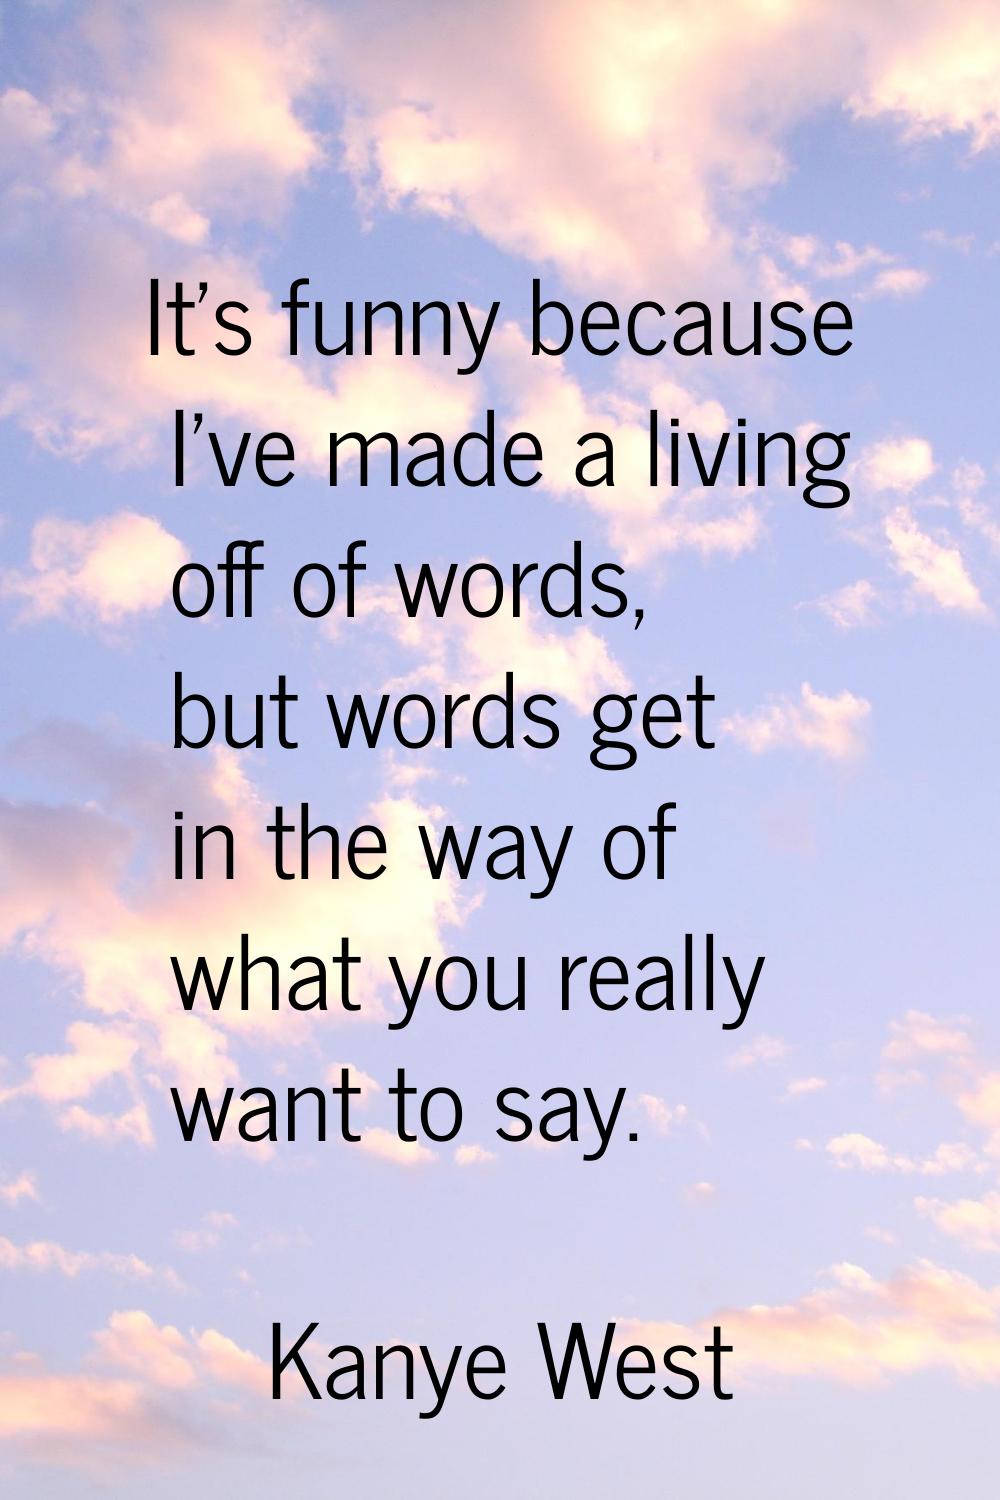 It's funny because I've made a living off of words, but words get in the way of what you really wan